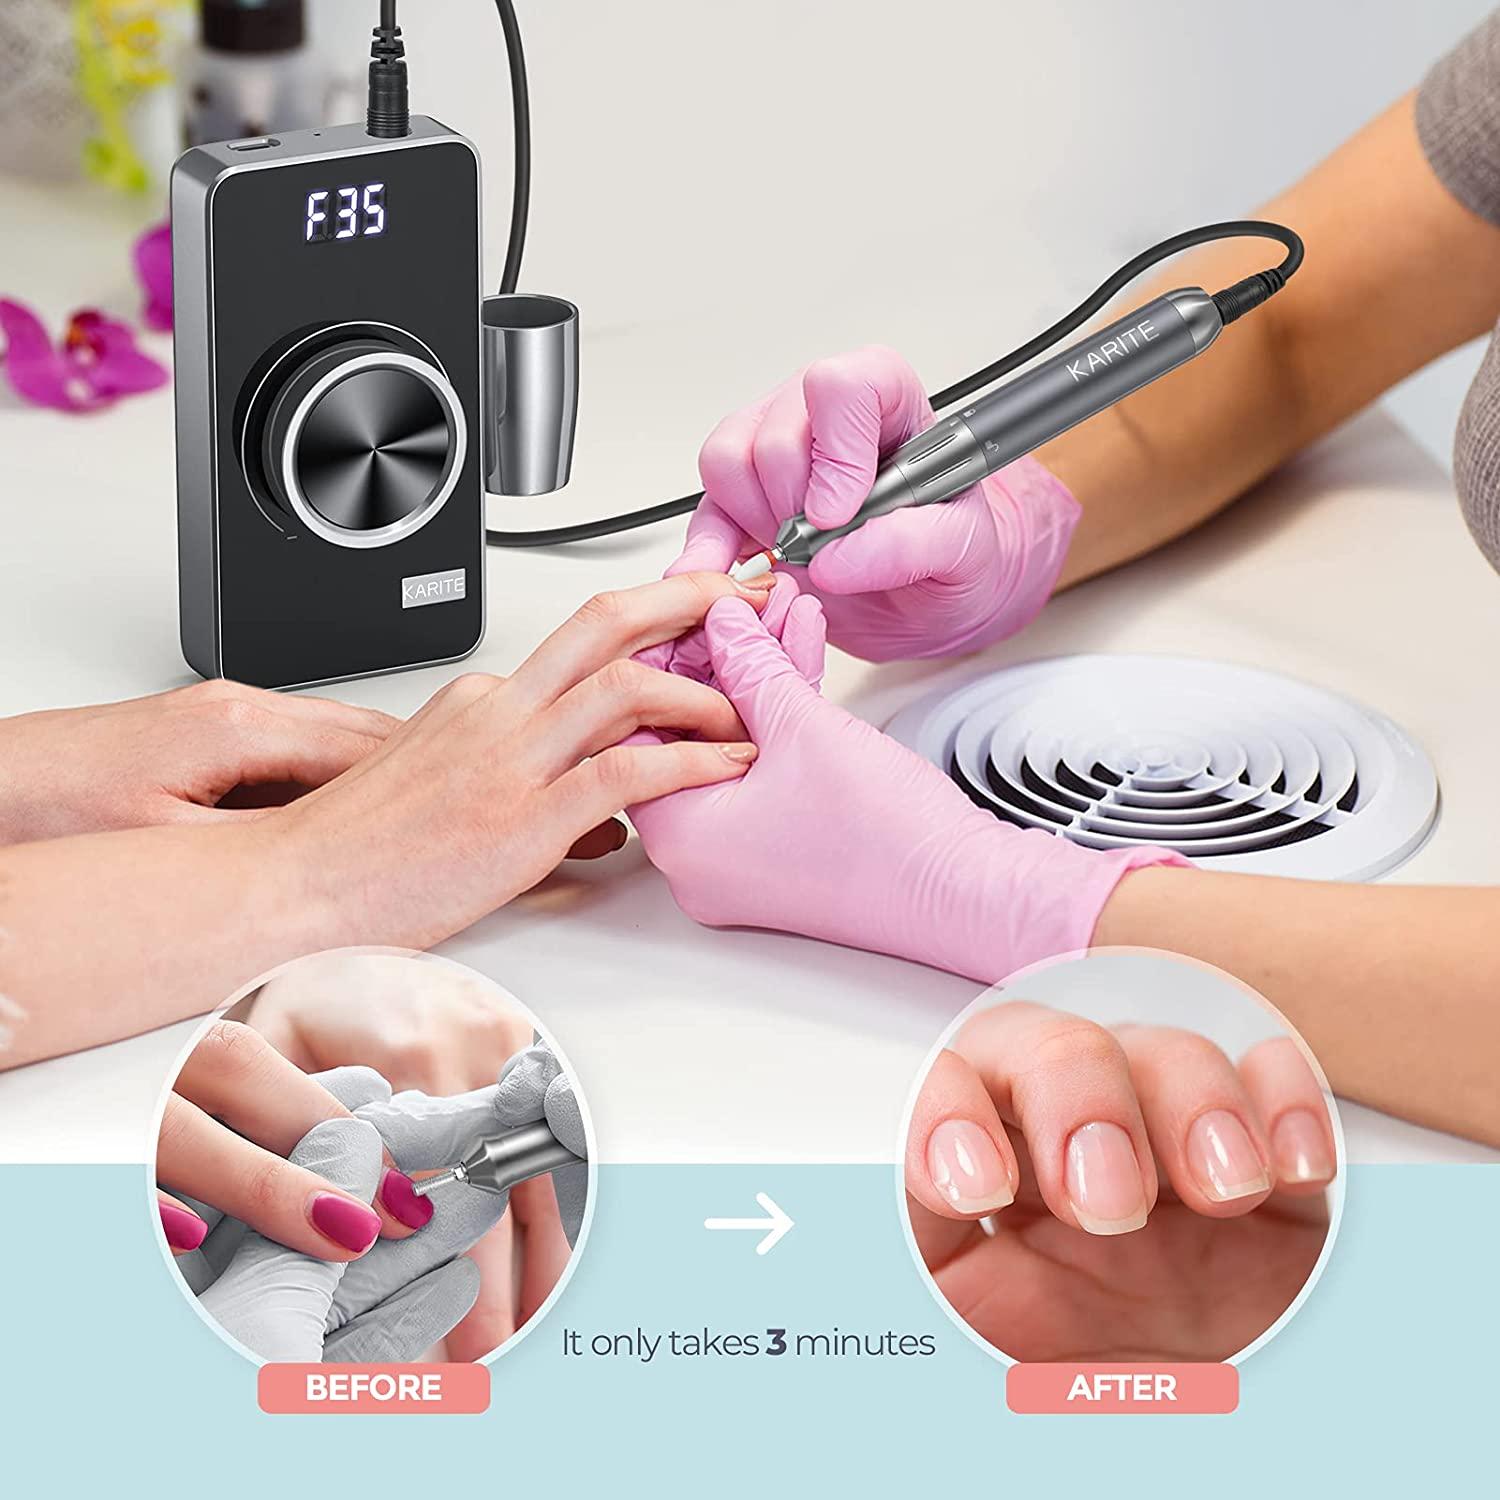 Karite Professional Nail Drill Machine for Acrylic Nails, 35000 RPM  Electric Nail File with 13 Bits, 30 Sanding Bands USB Rechargeable,  Portable Electronic Nail Filer for Home Salon Manicure Tools Gray